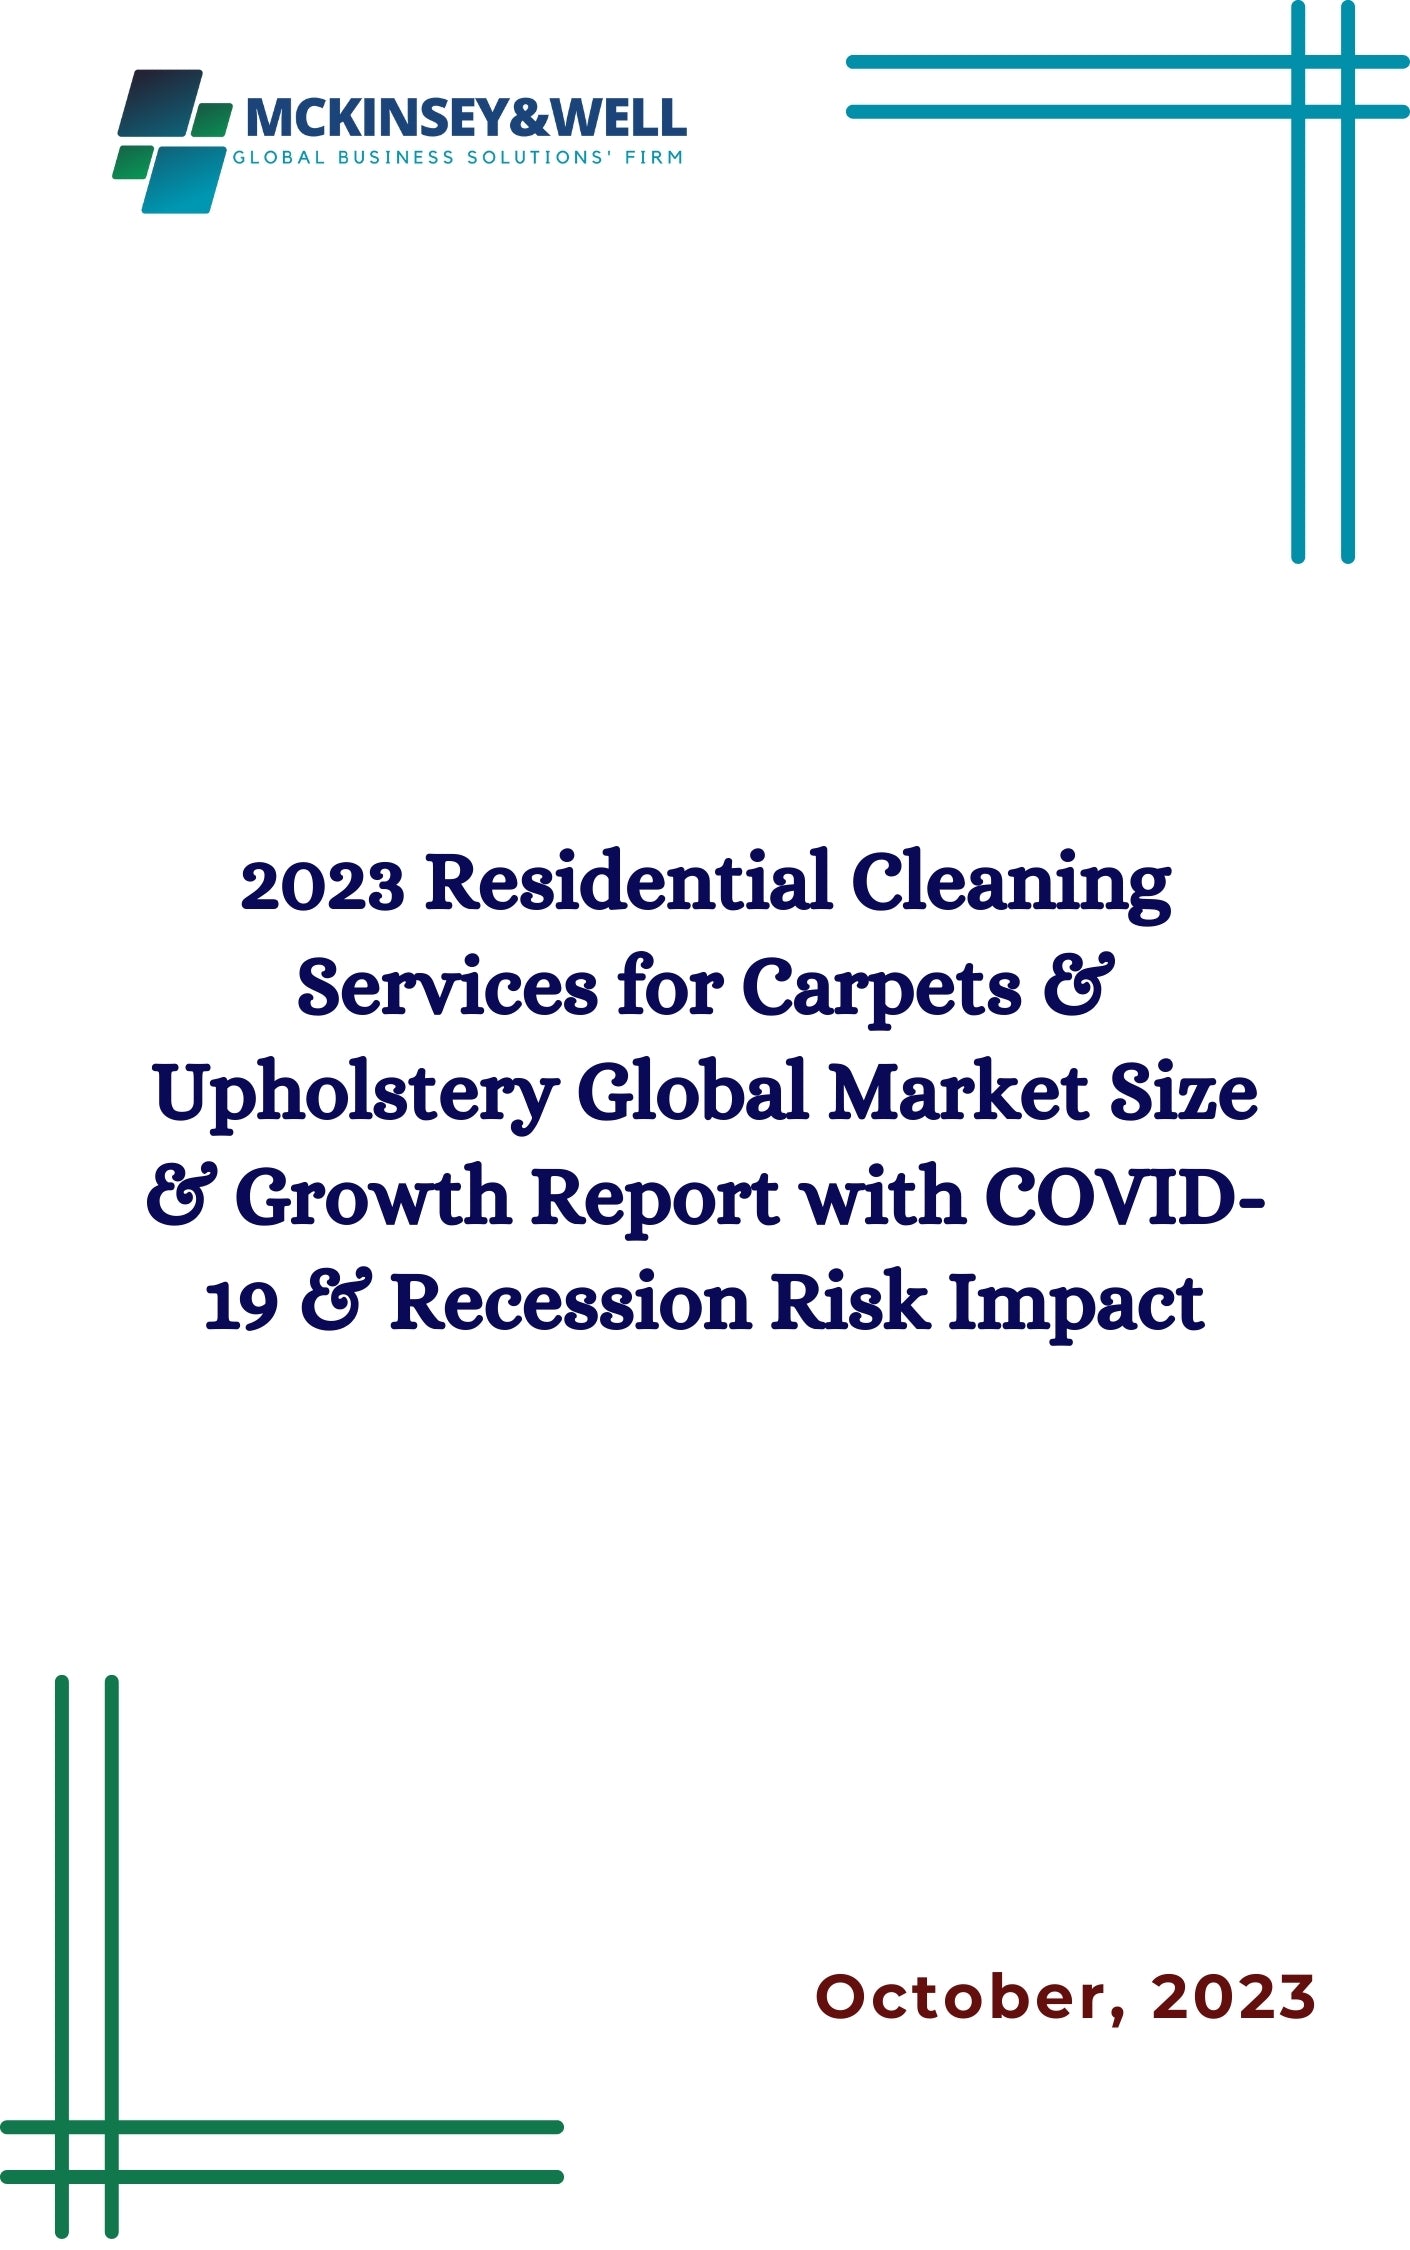 2023 Residential Cleaning Services for Carpets & Upholstery Global Market Size & Growth Report with COVID-19 & Recession Risk Impact